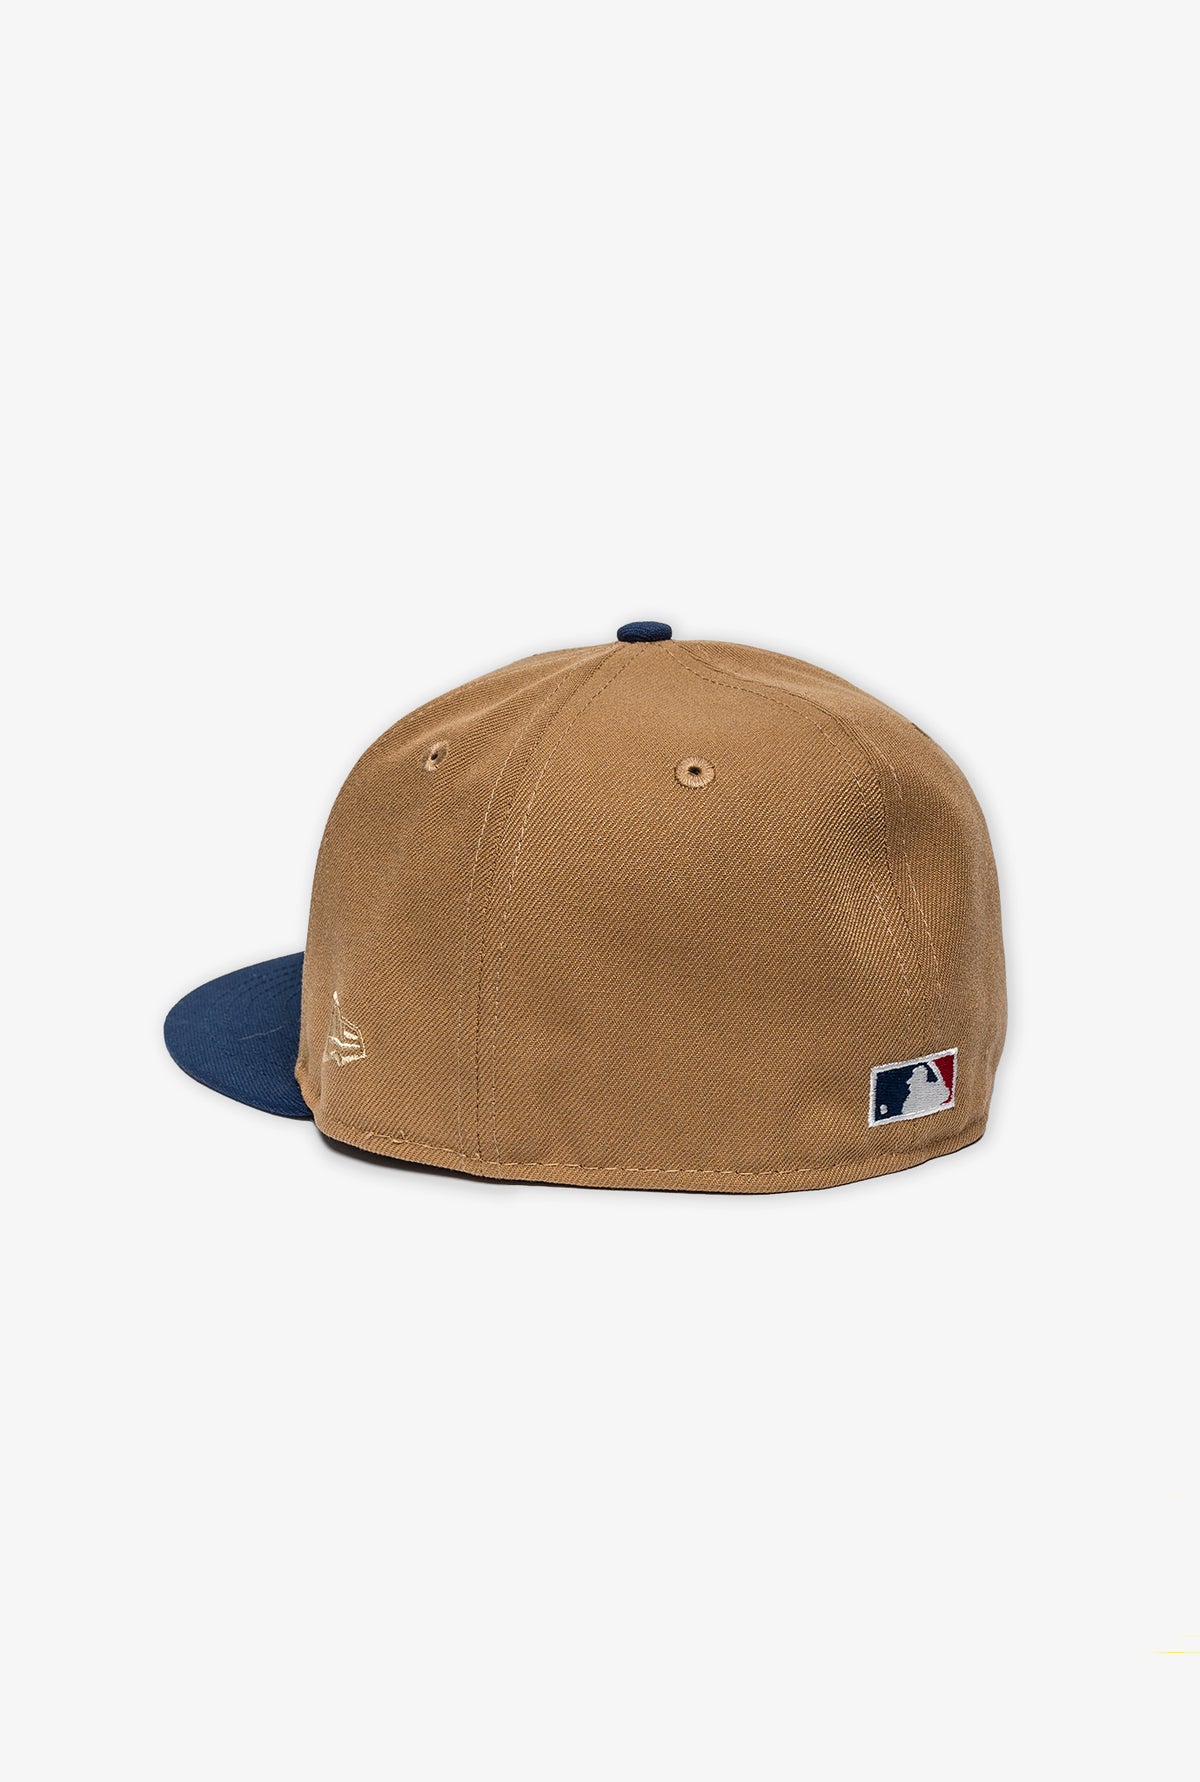 Montreal Expos 25th Anniversary 59FIFTY - Khaki/Oceanside